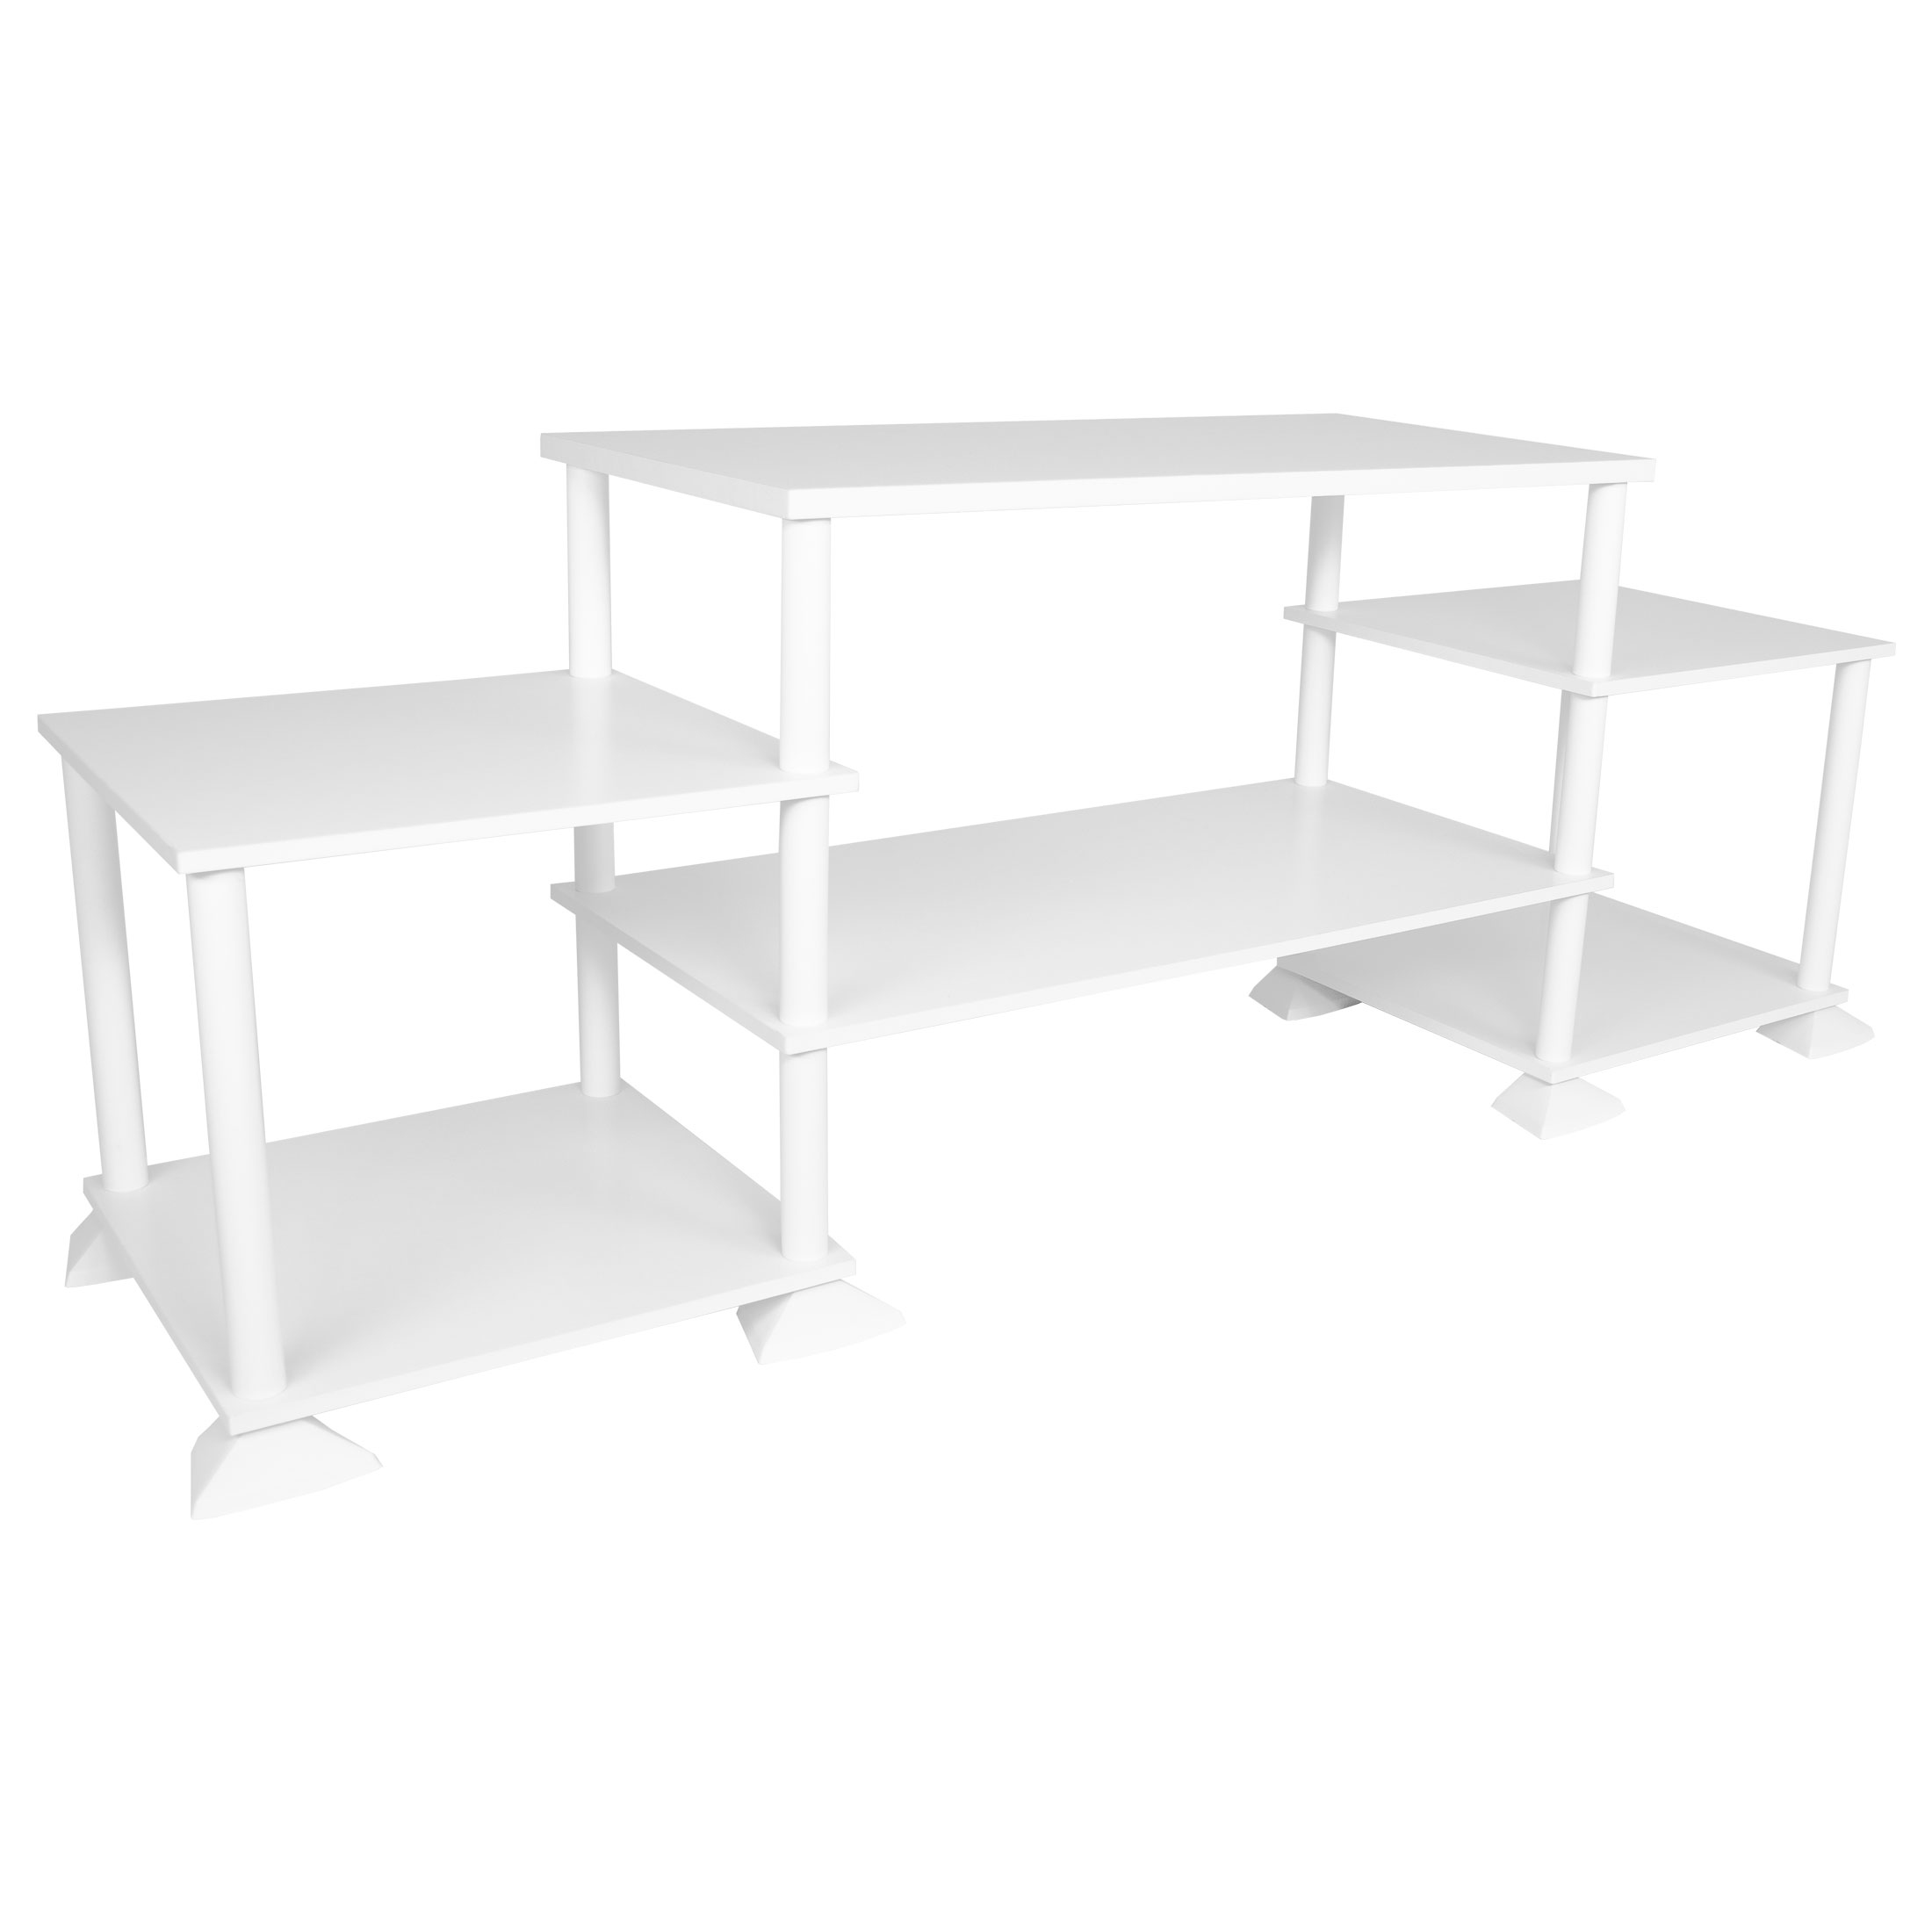 Mainstays No Tools Assembly TV Stand for TVs up to 40", White - image 3 of 5